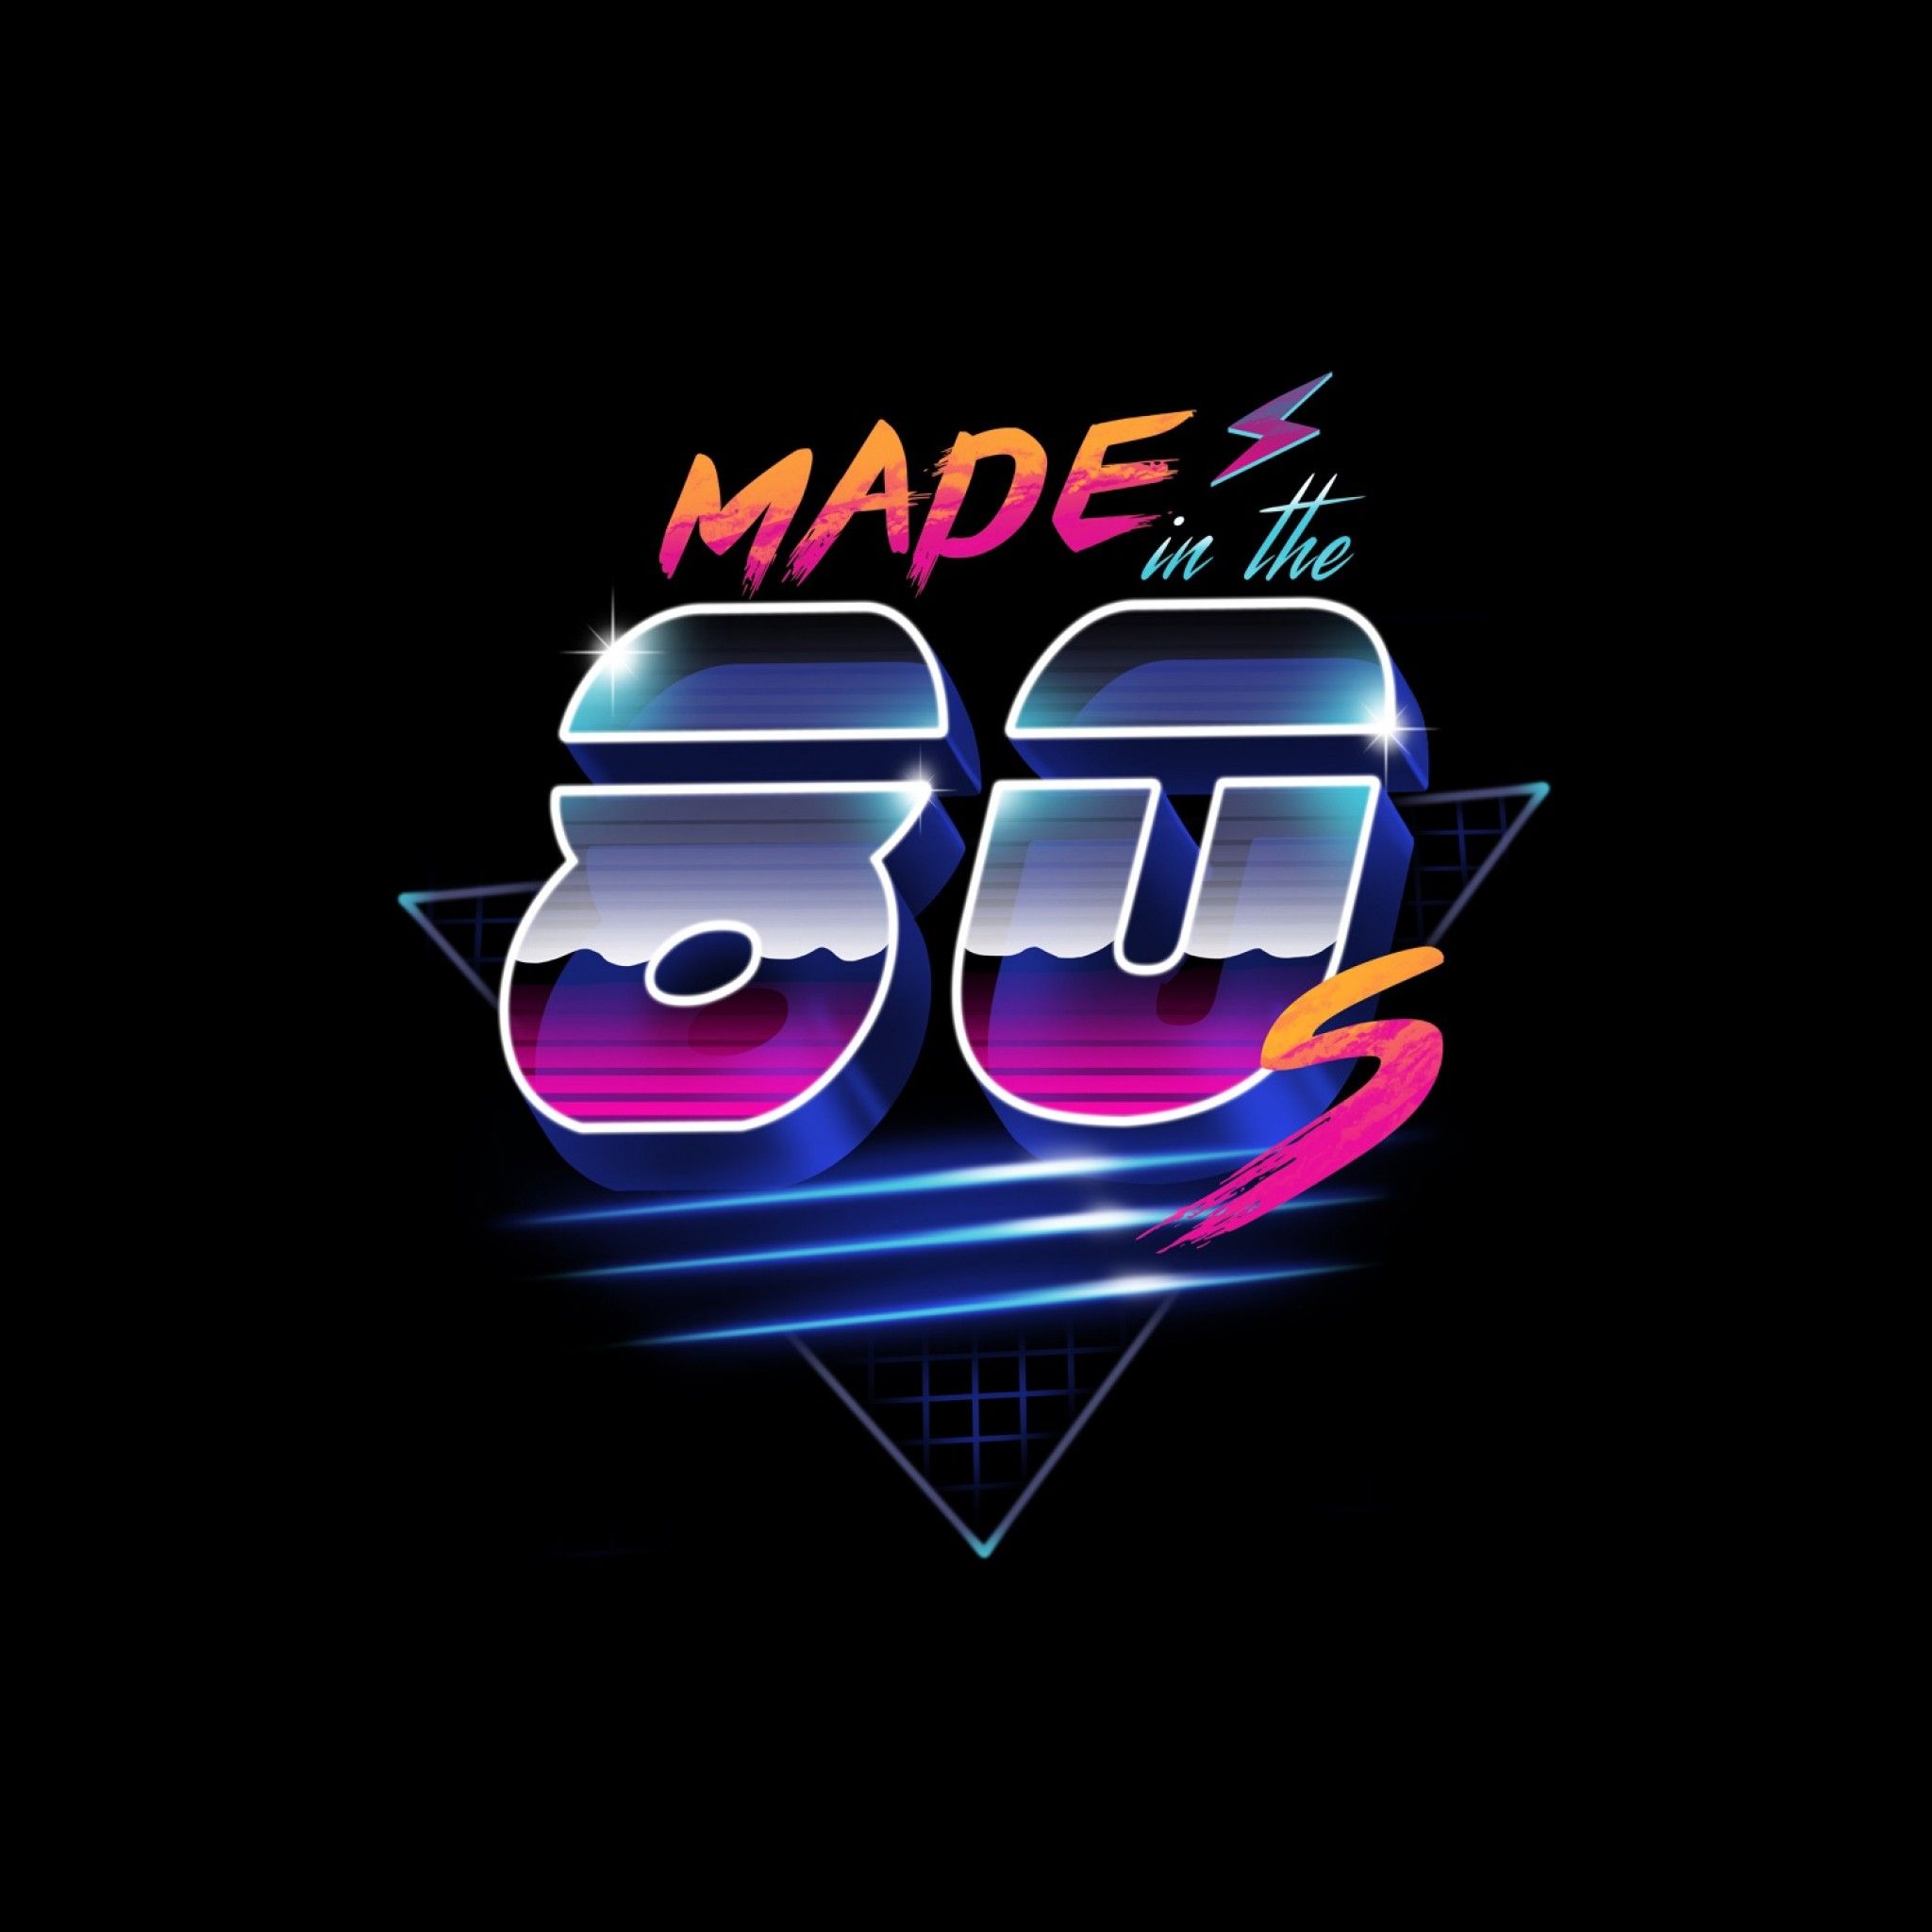 Made in the 80s - 80s